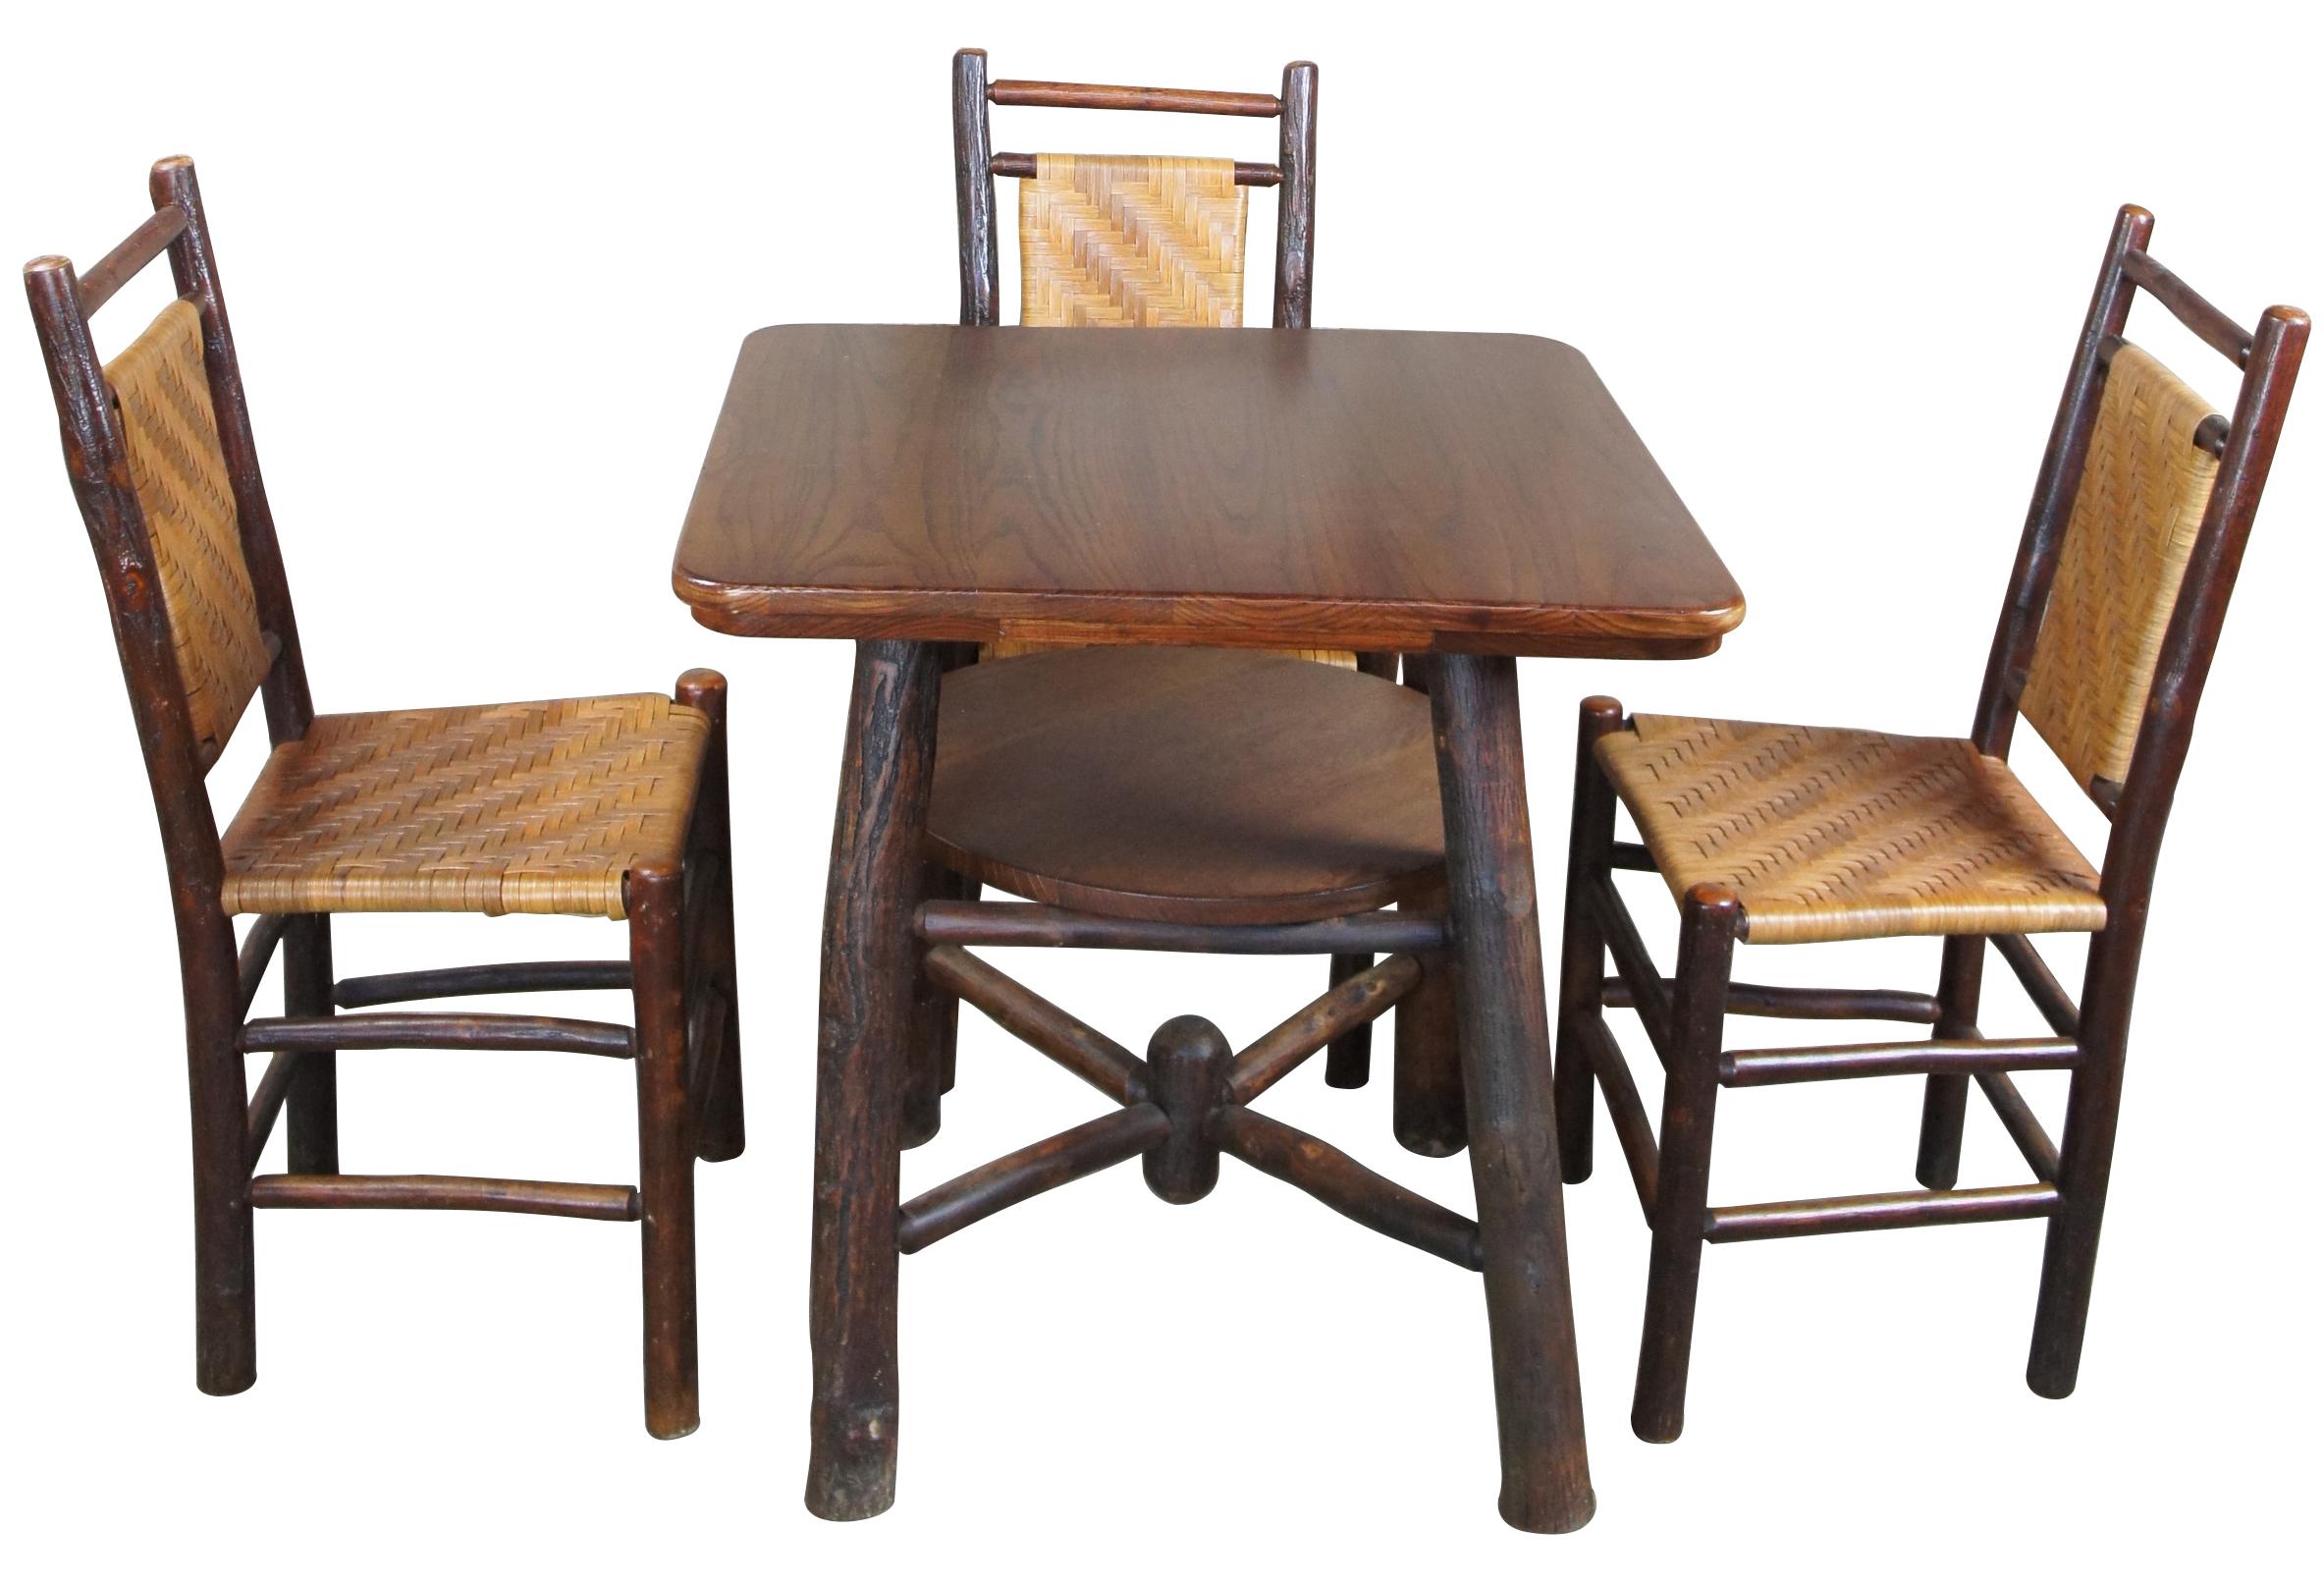 Rustic Hickory Furniture Company game table & chairs no 103 & 19 Adirondack lodge

Pre-1930s parlor game or dining set by The Rustic Hickory Furniture Company. Features a primitive log and rattan style. Item no. 103 & no. 19 in original catalog.